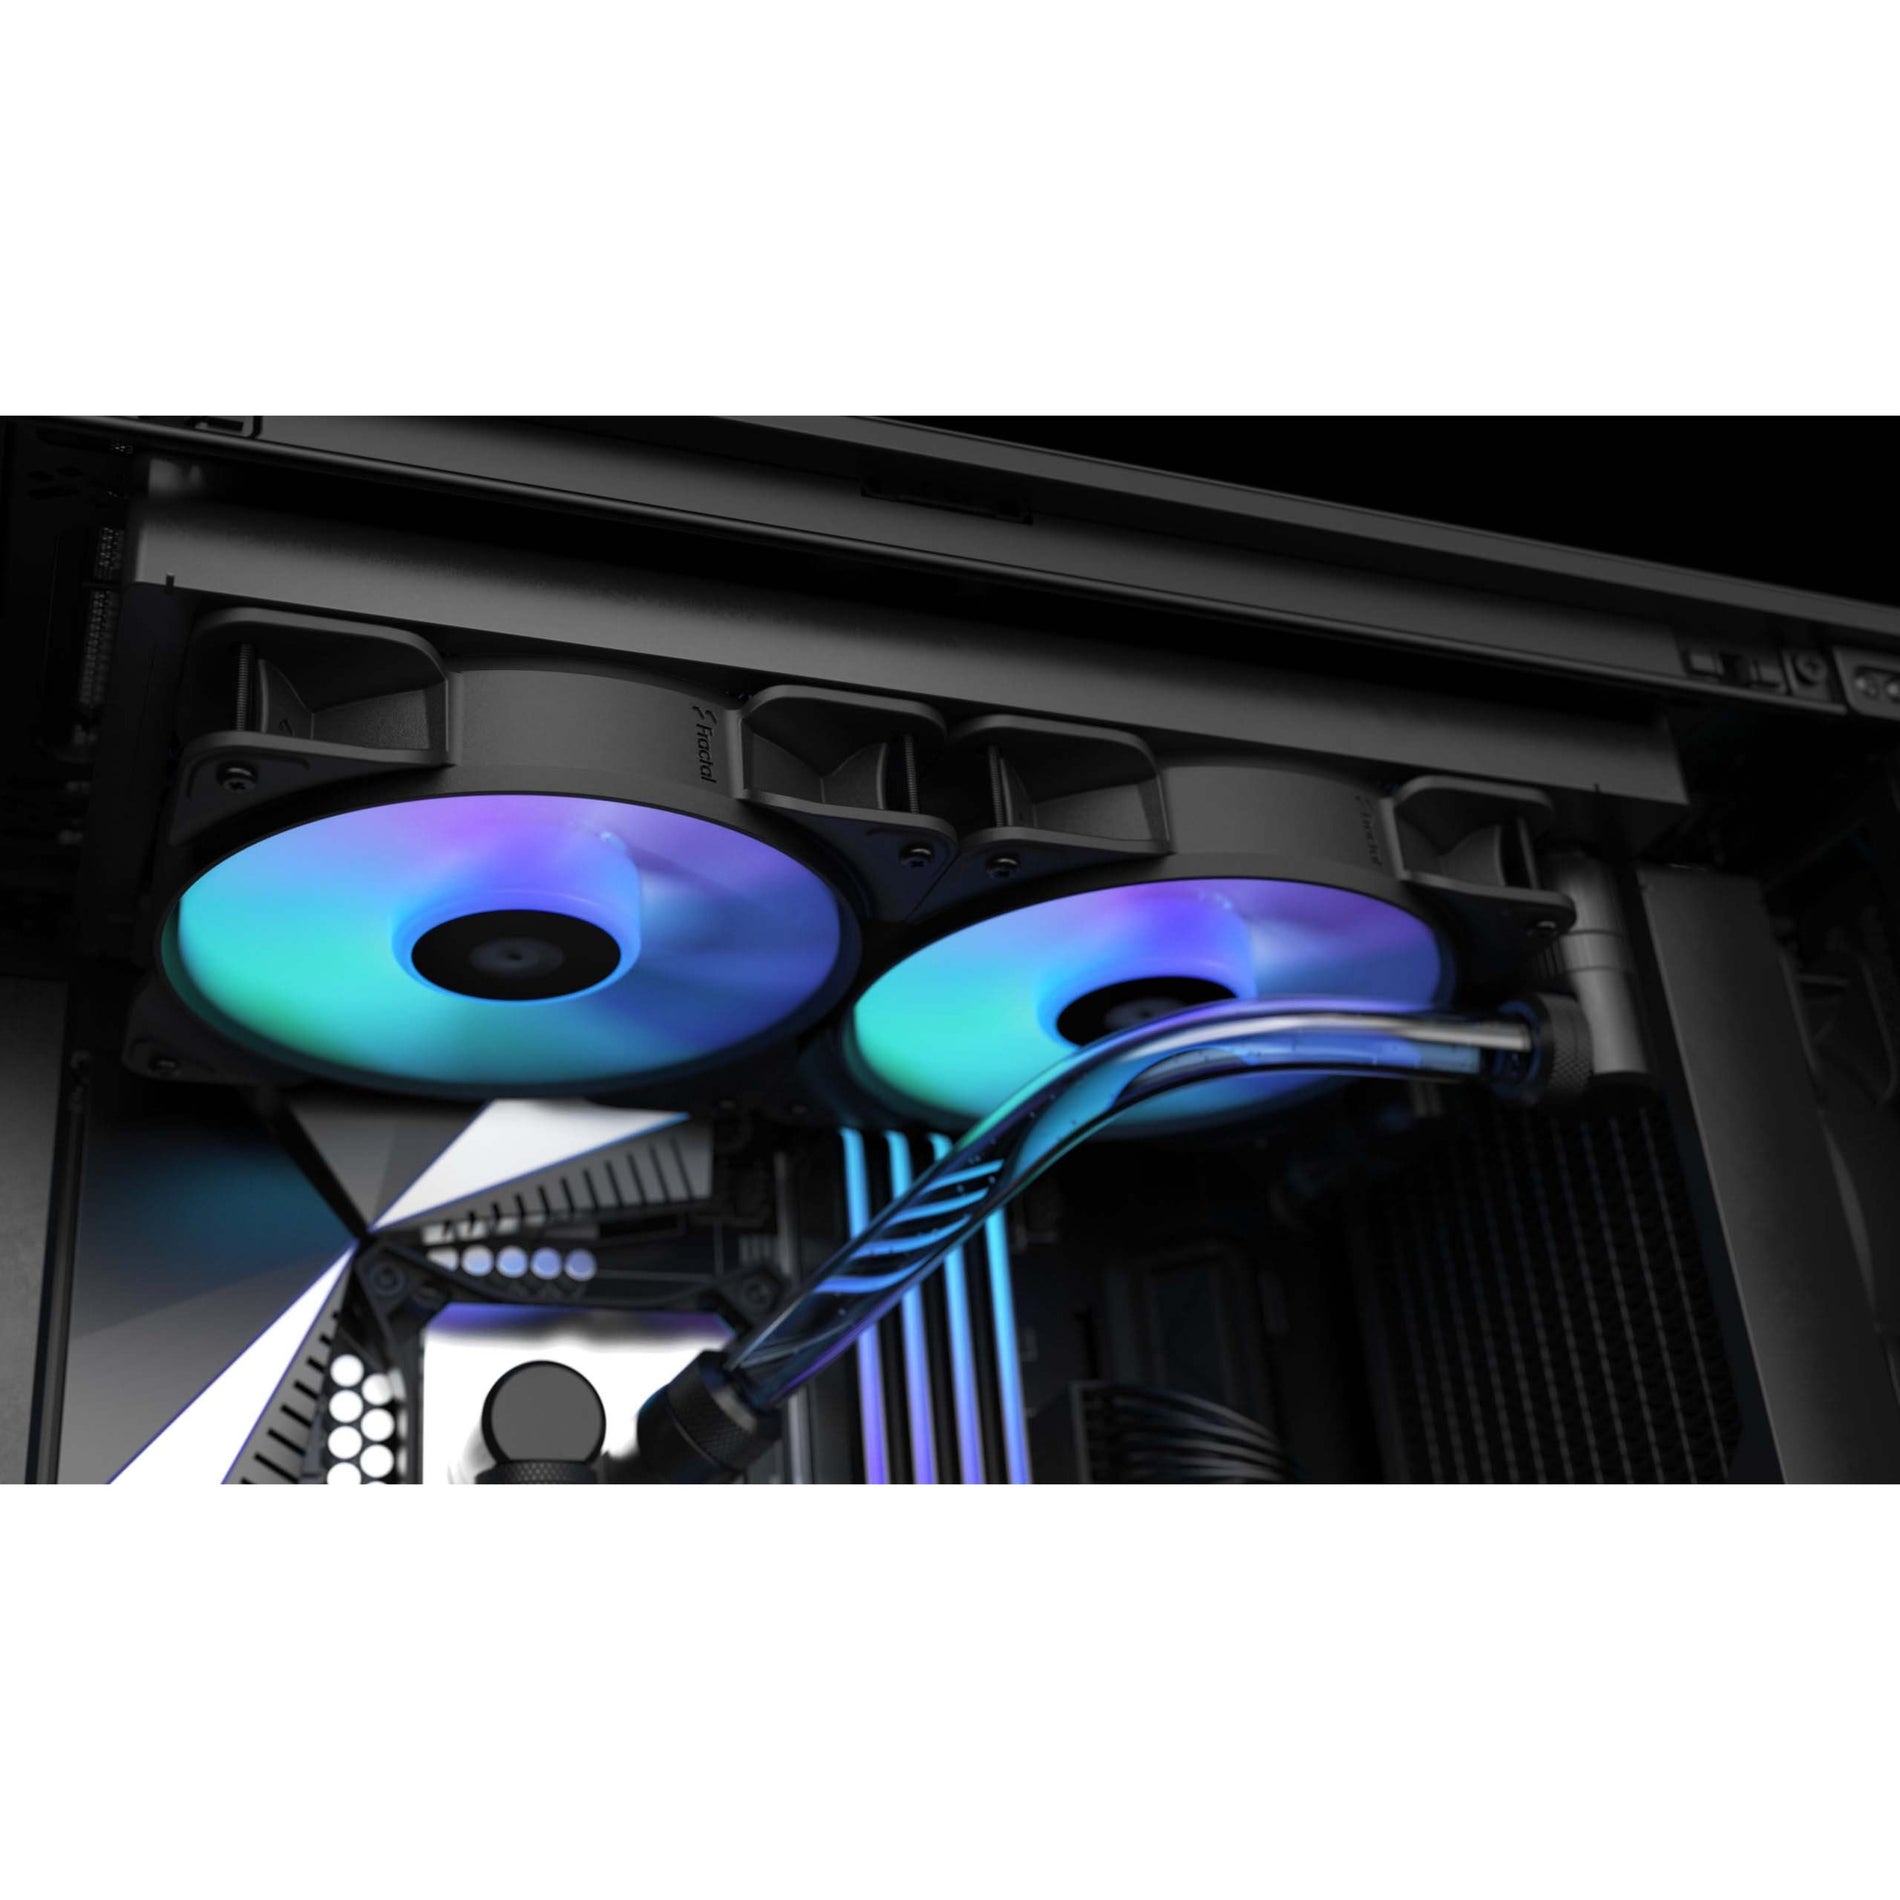 Fractal Design FD-F-AS1-1407 Aspect 14 RGB PWM Cooling Fan - 3 Pack, High Airflow, ARGB LED, Quiet Operation